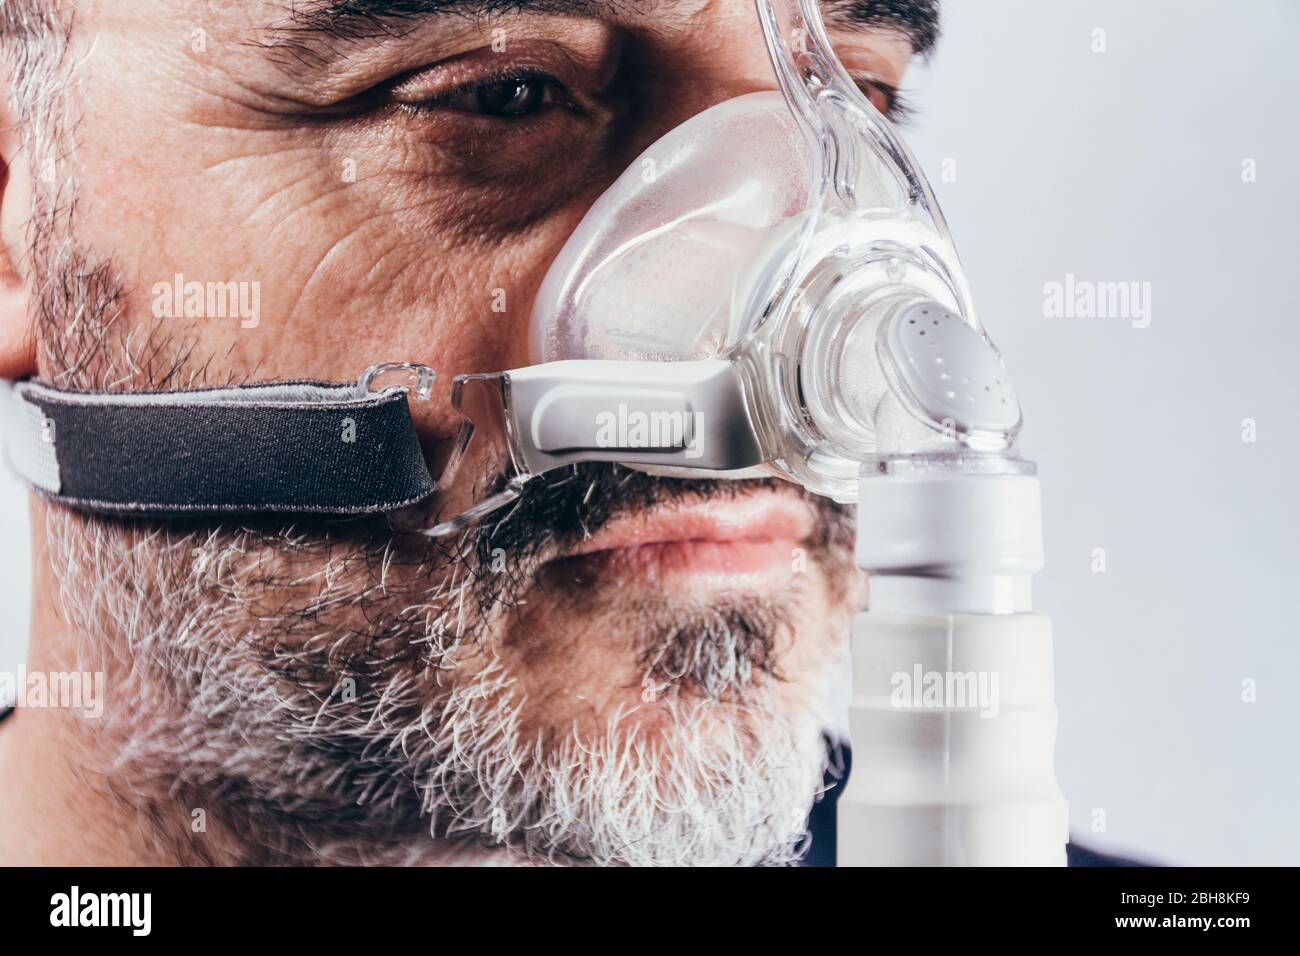 Senior man with respiratory mask for sleep disorders. Apnea. Medical devices. Air pump. Assisted breathing Stock Photo